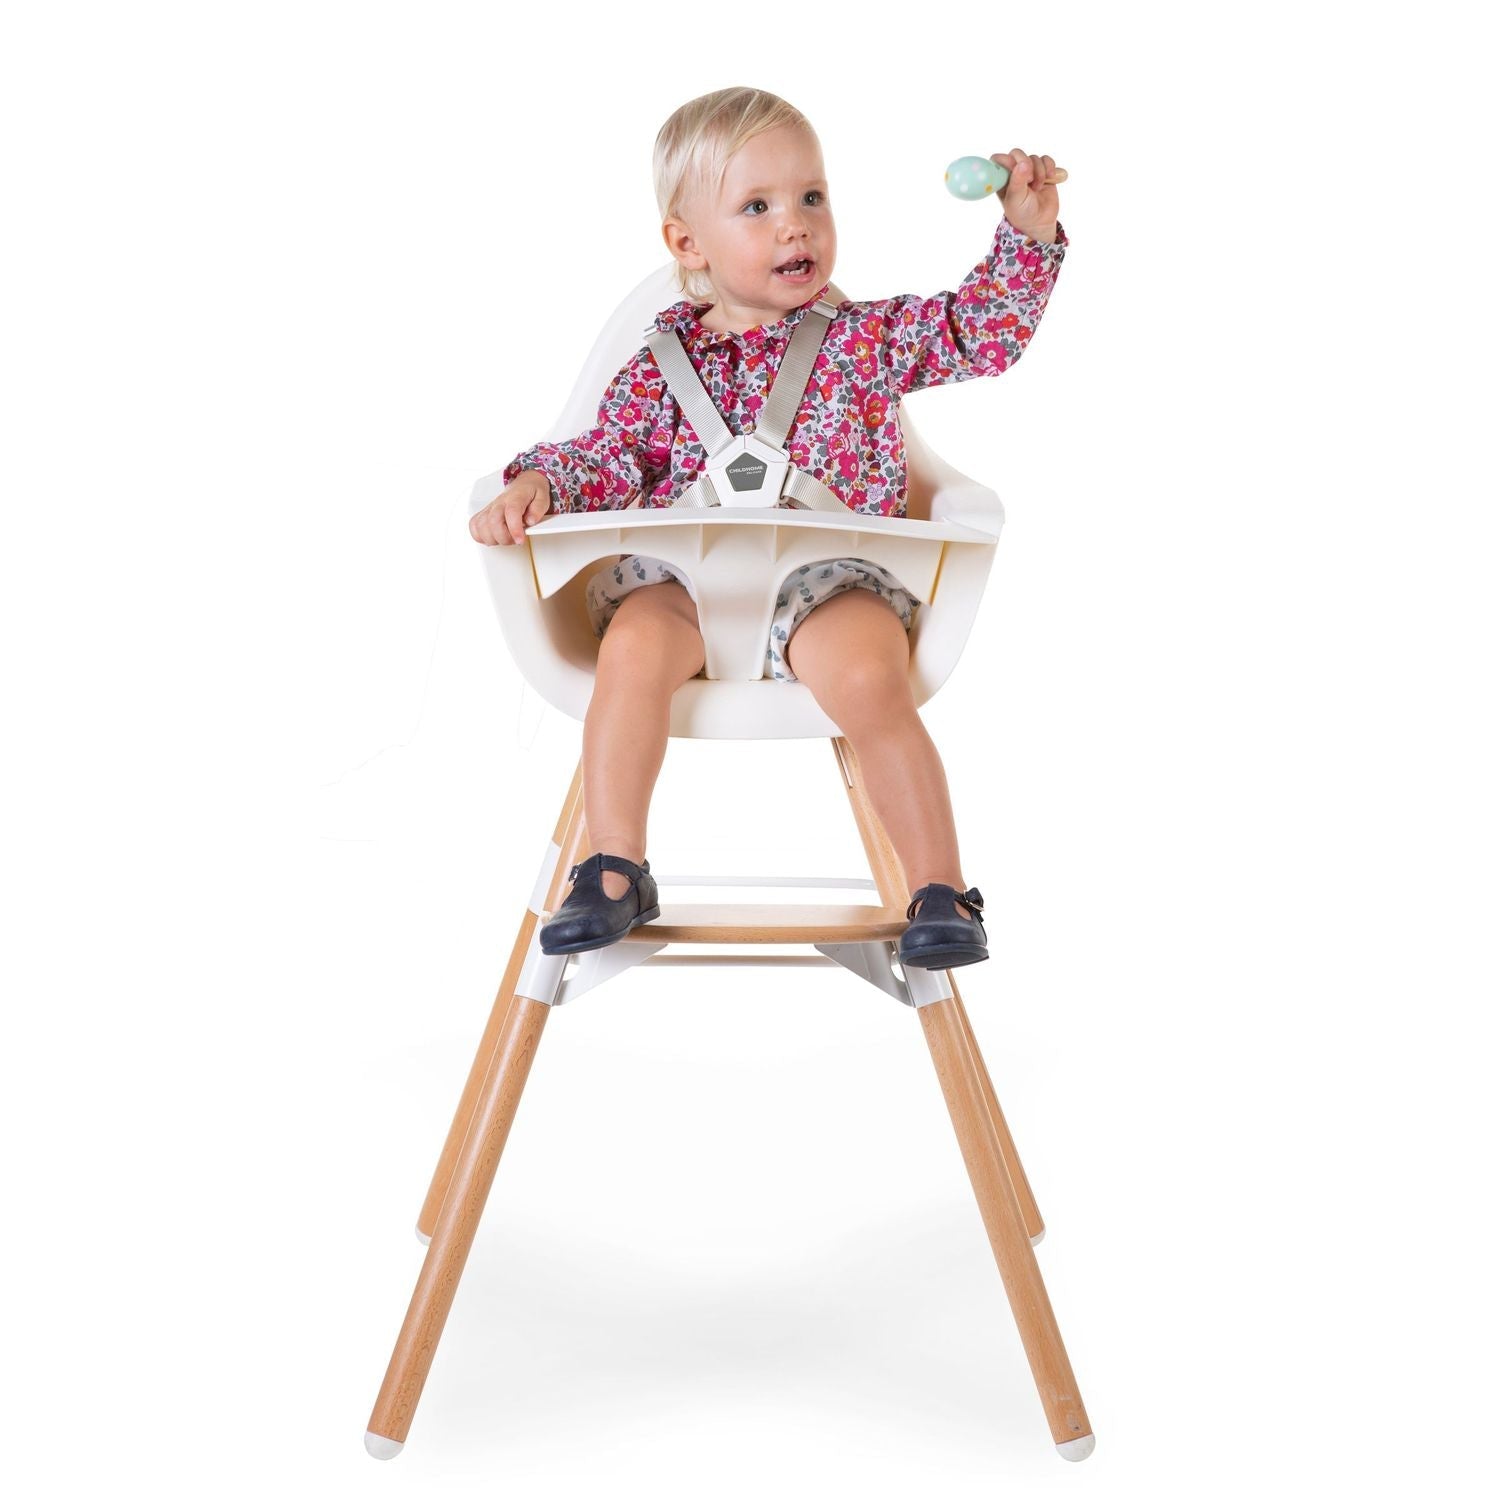 Childhome Evolu 2 High Chair - Tiny Tots Baby Store 